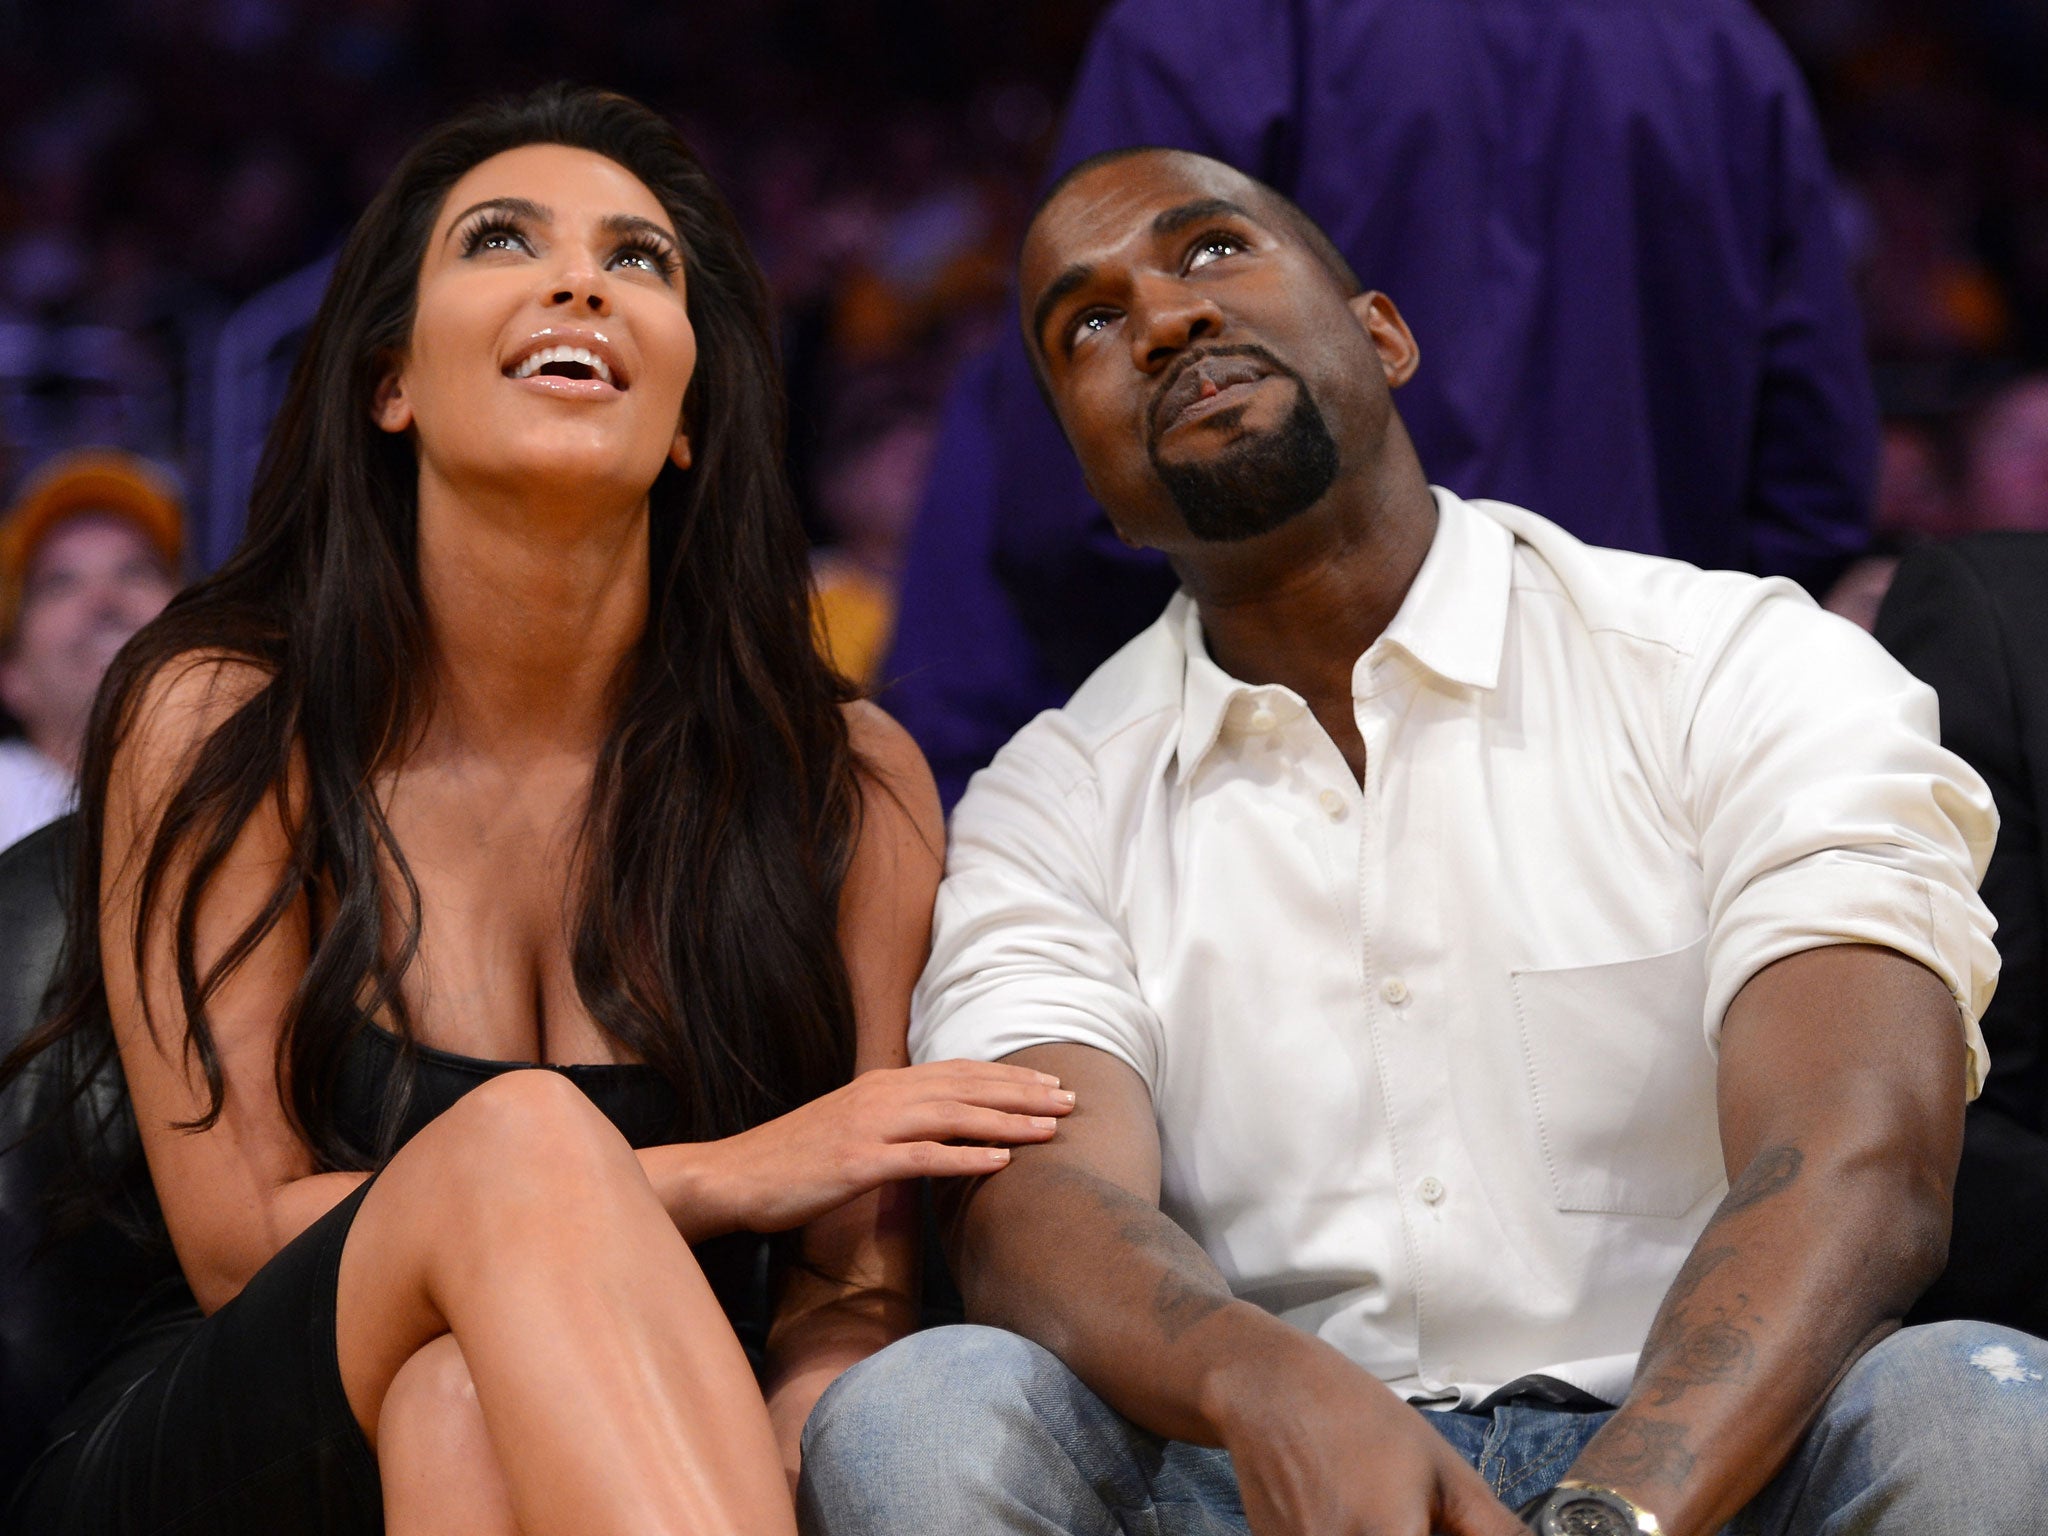 Kanye West and Kim Kardashian are expecting their first child